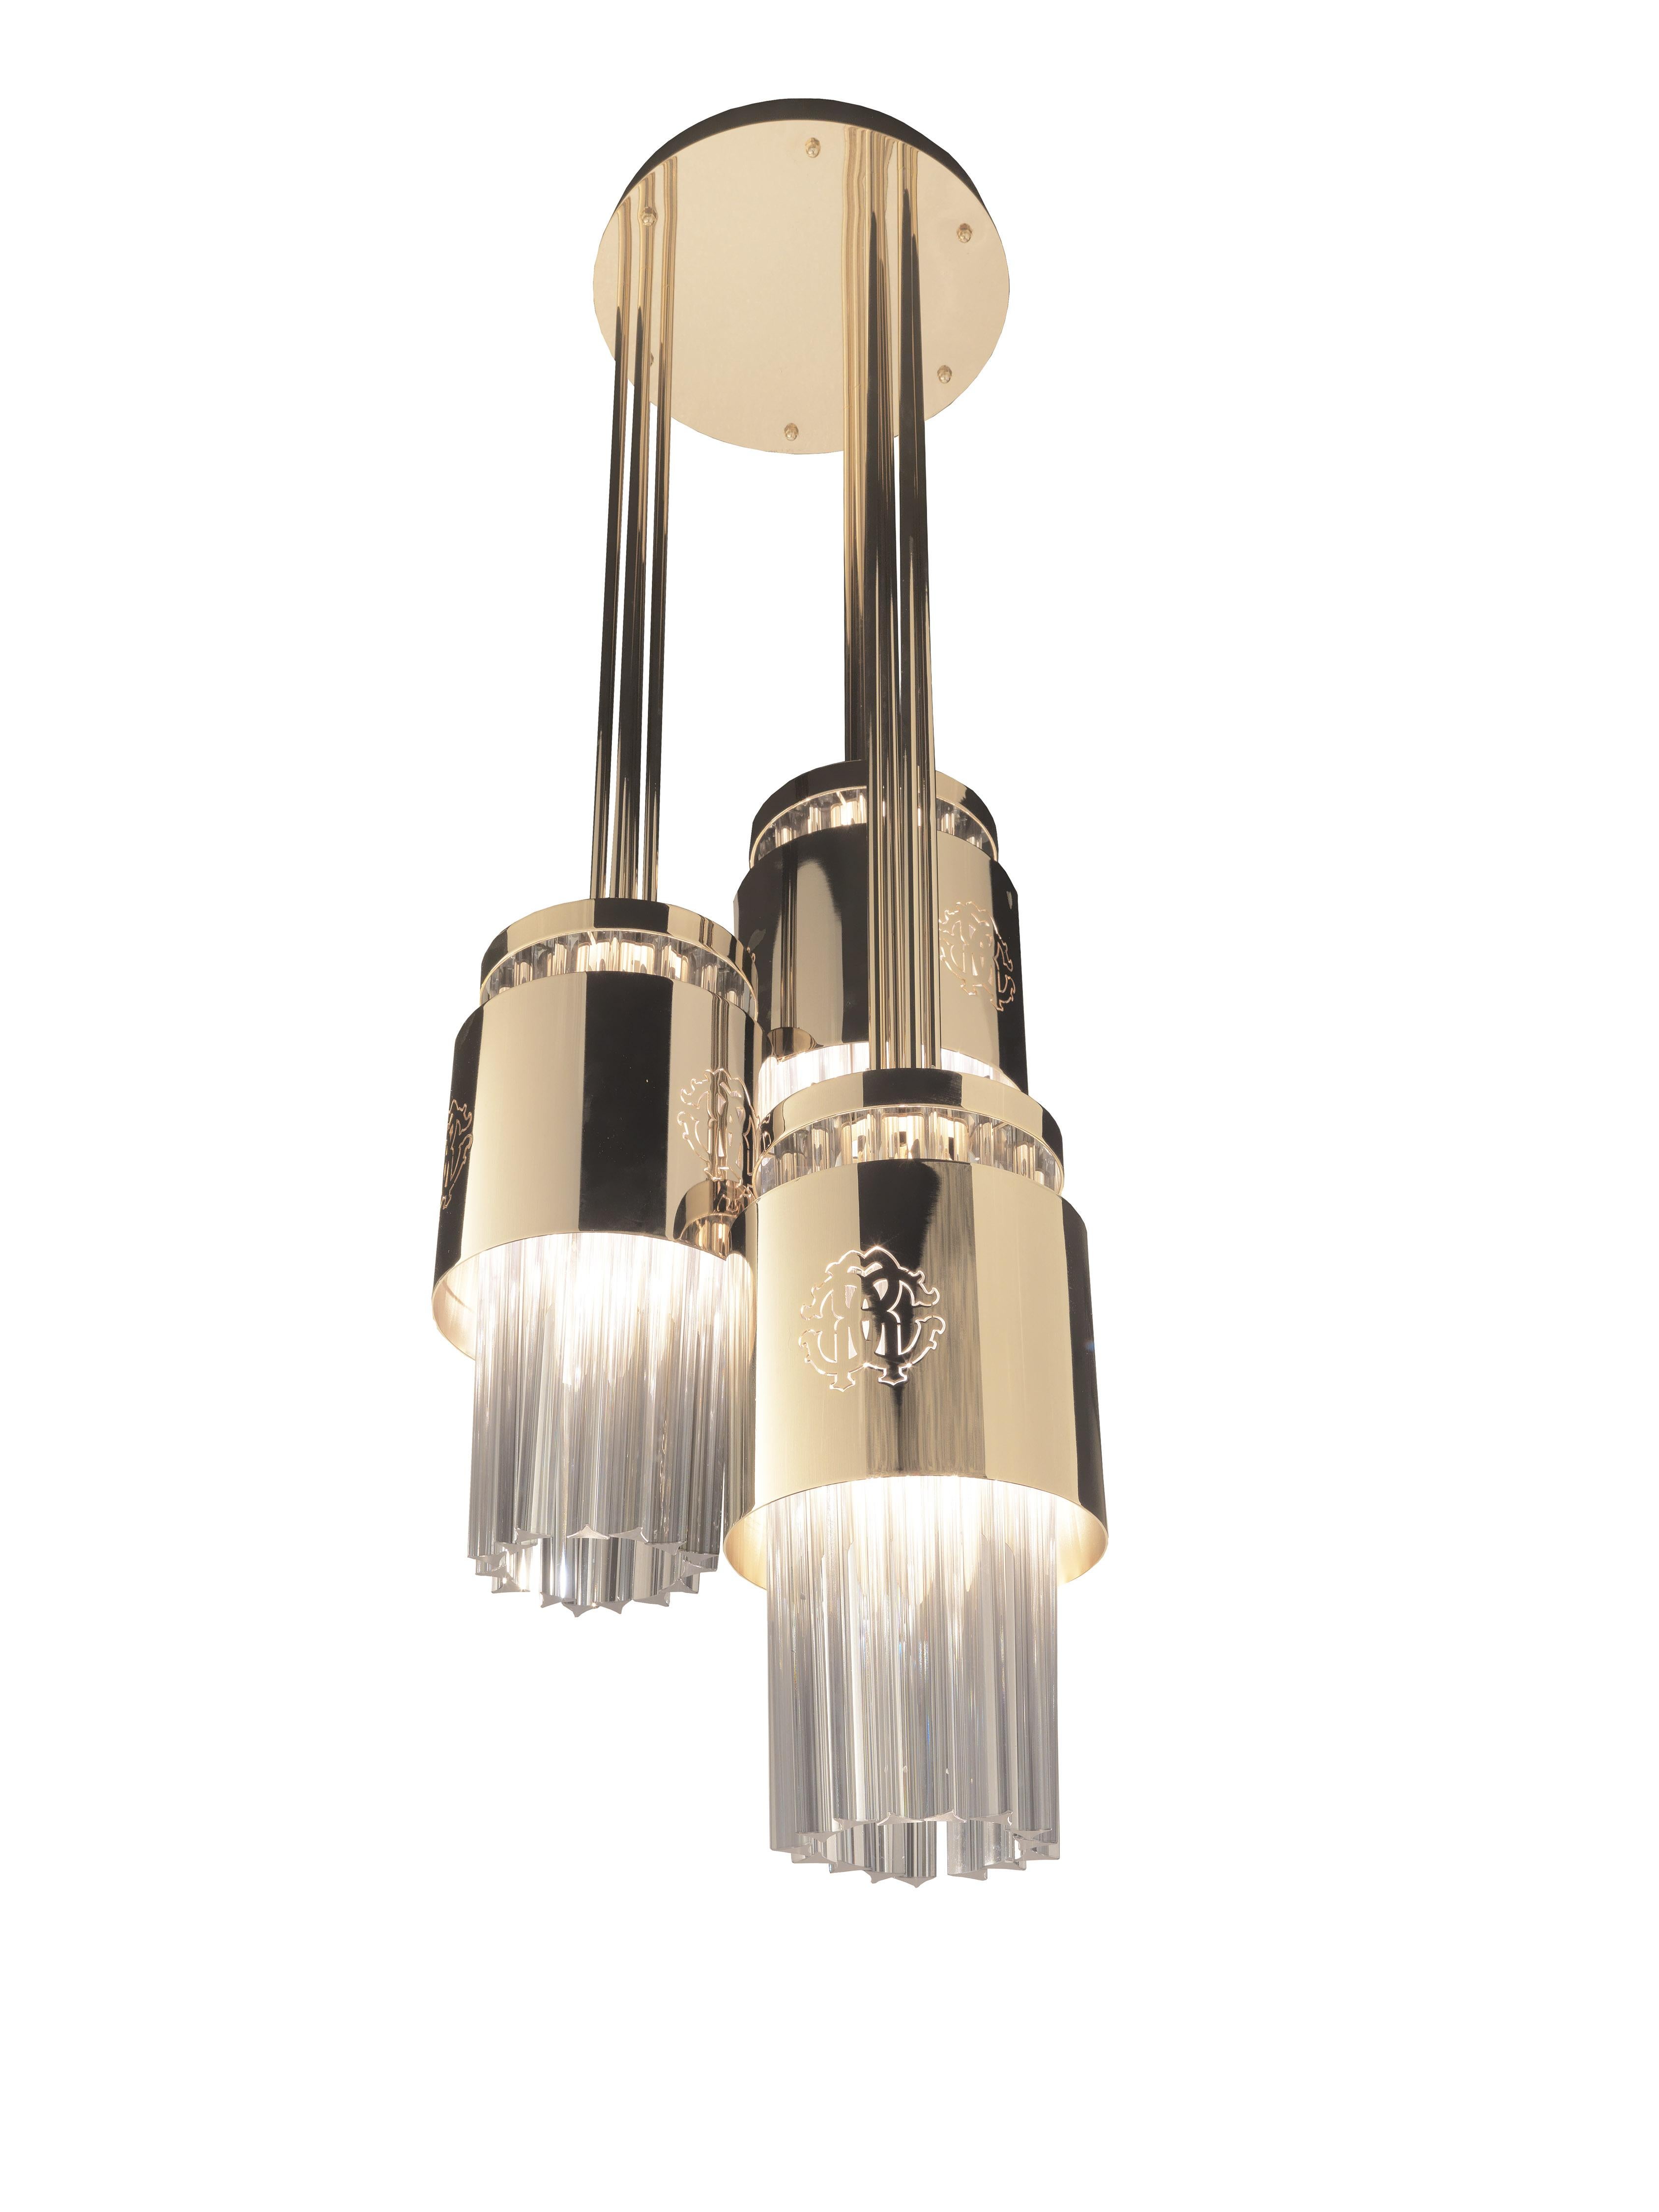 Chandelier with metal arms light gold finishing and glass sticks. Suitable dimension for ceiling height 300 cm.
 